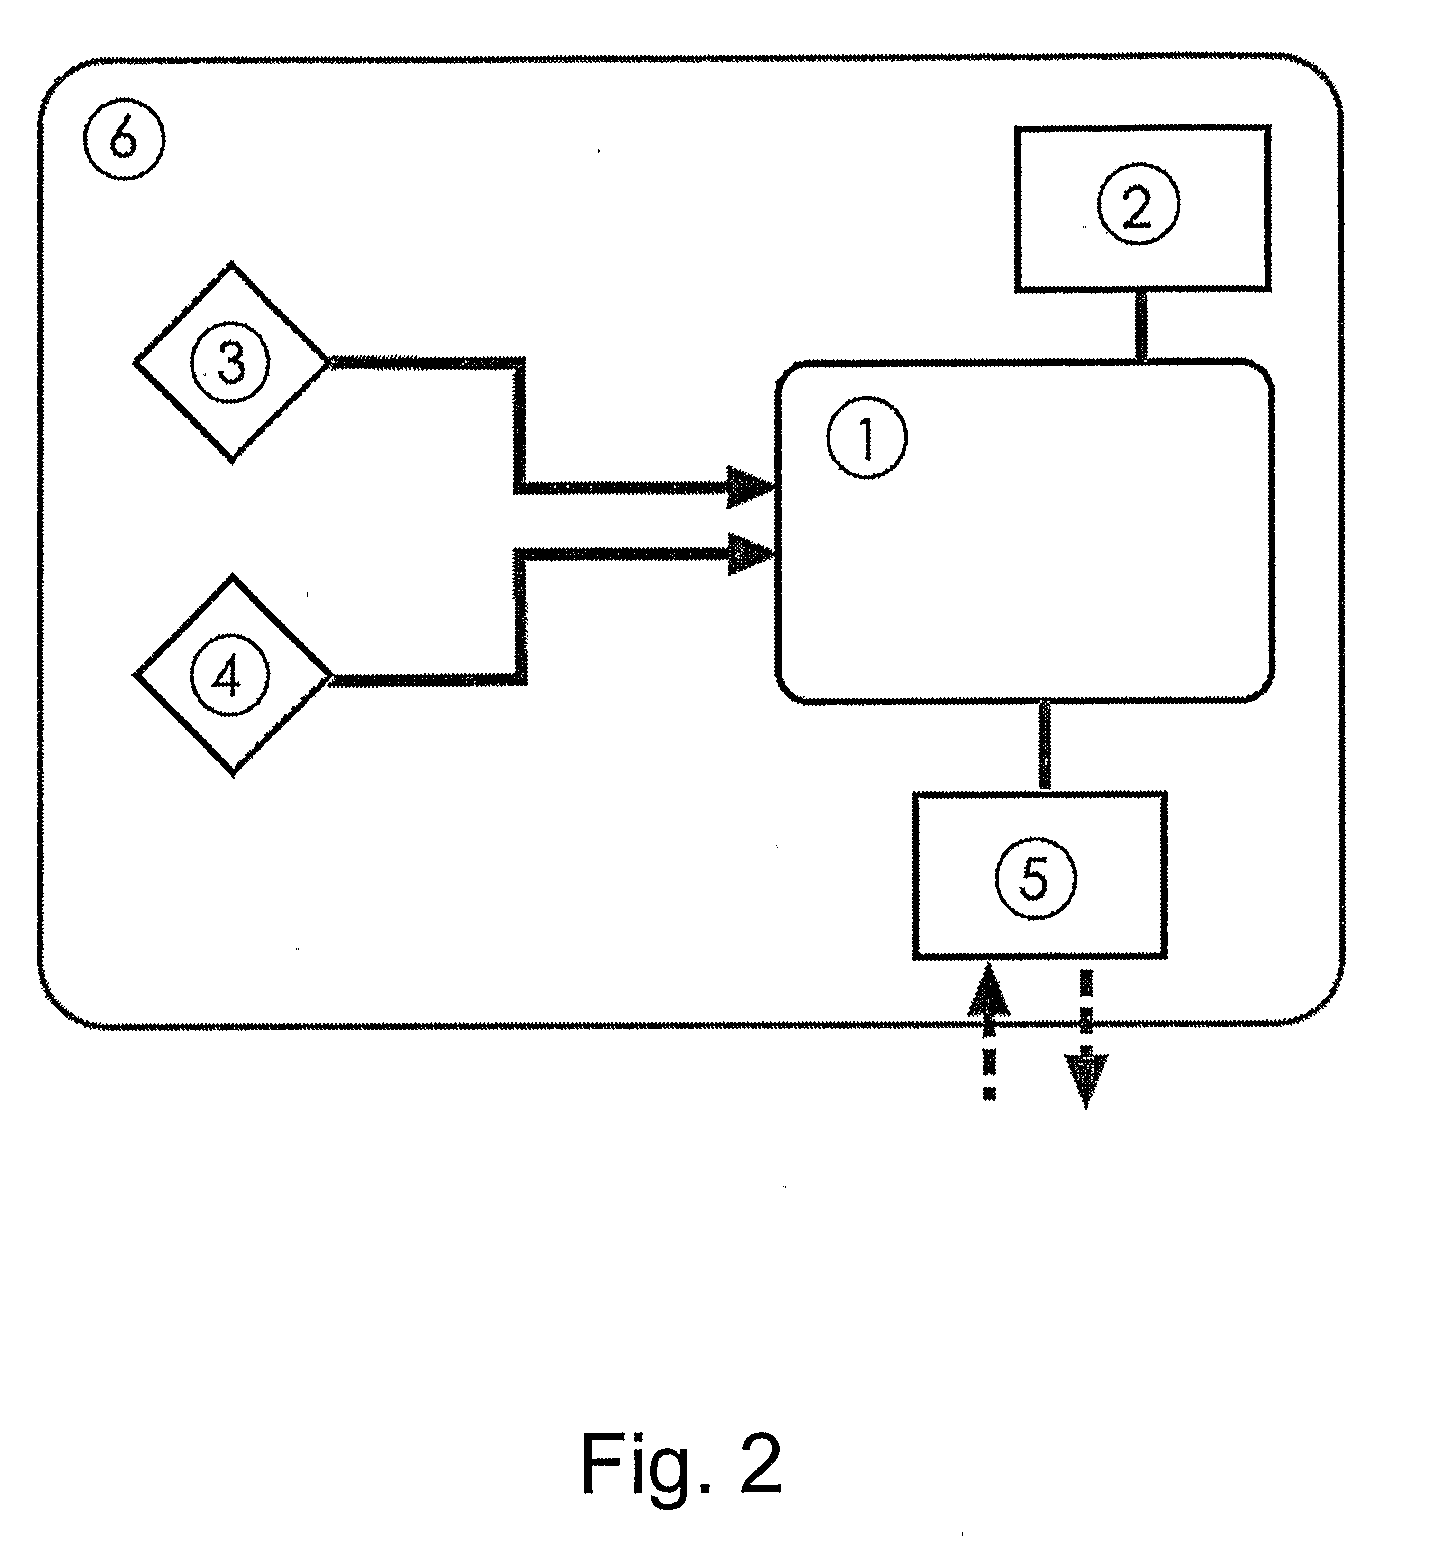 Method and Device for Detecting Estrus